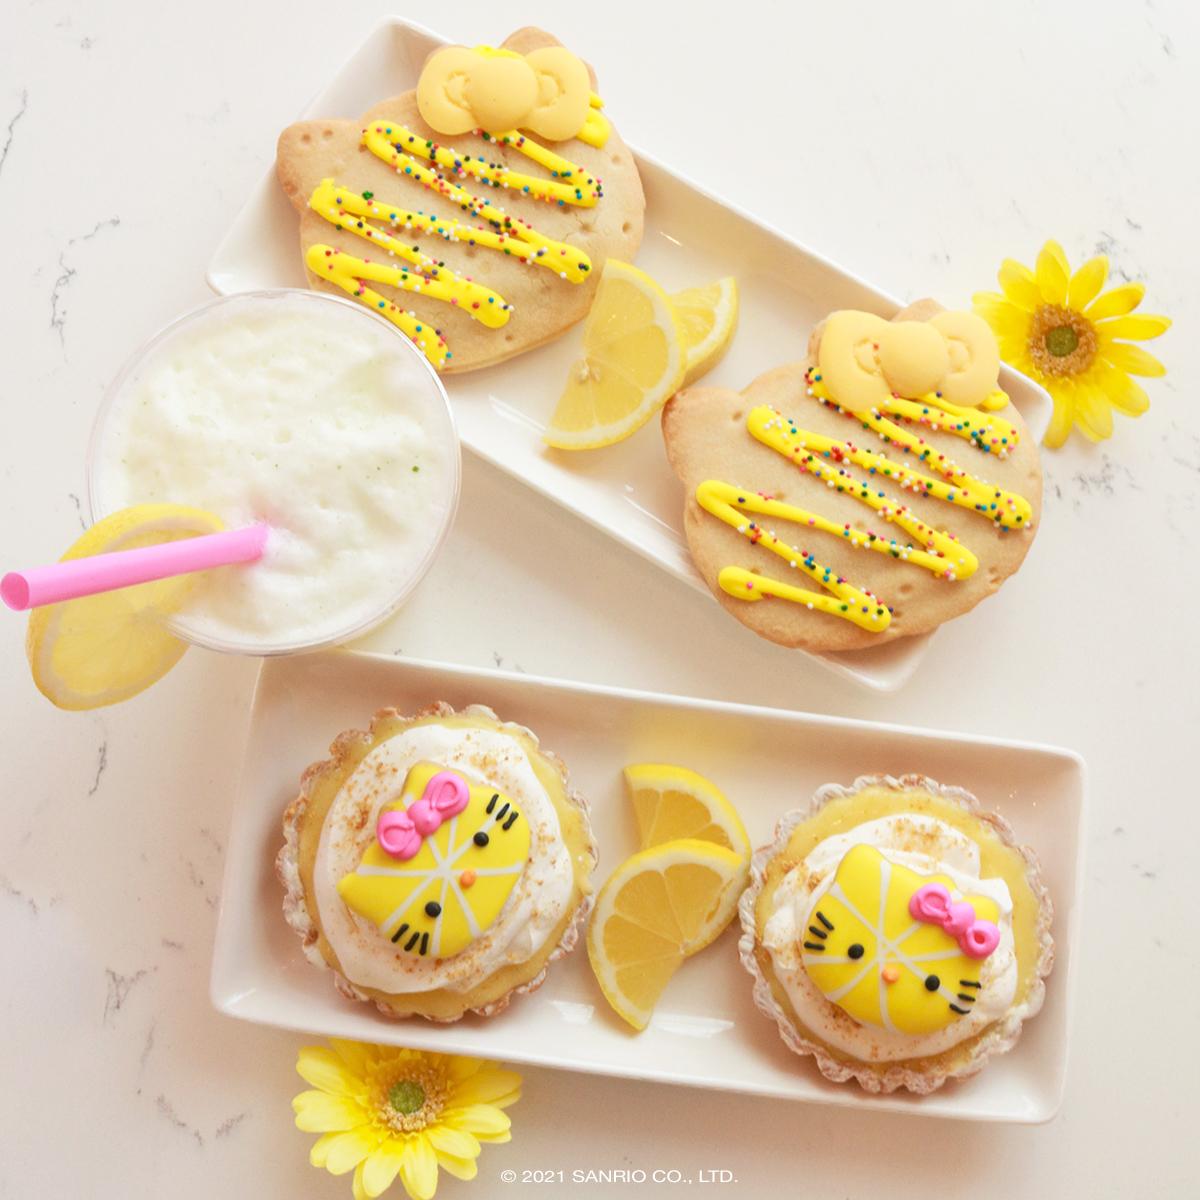 Hello Kitty Cafe - Our new lemony sweet menu is back! 🍋✨Come on